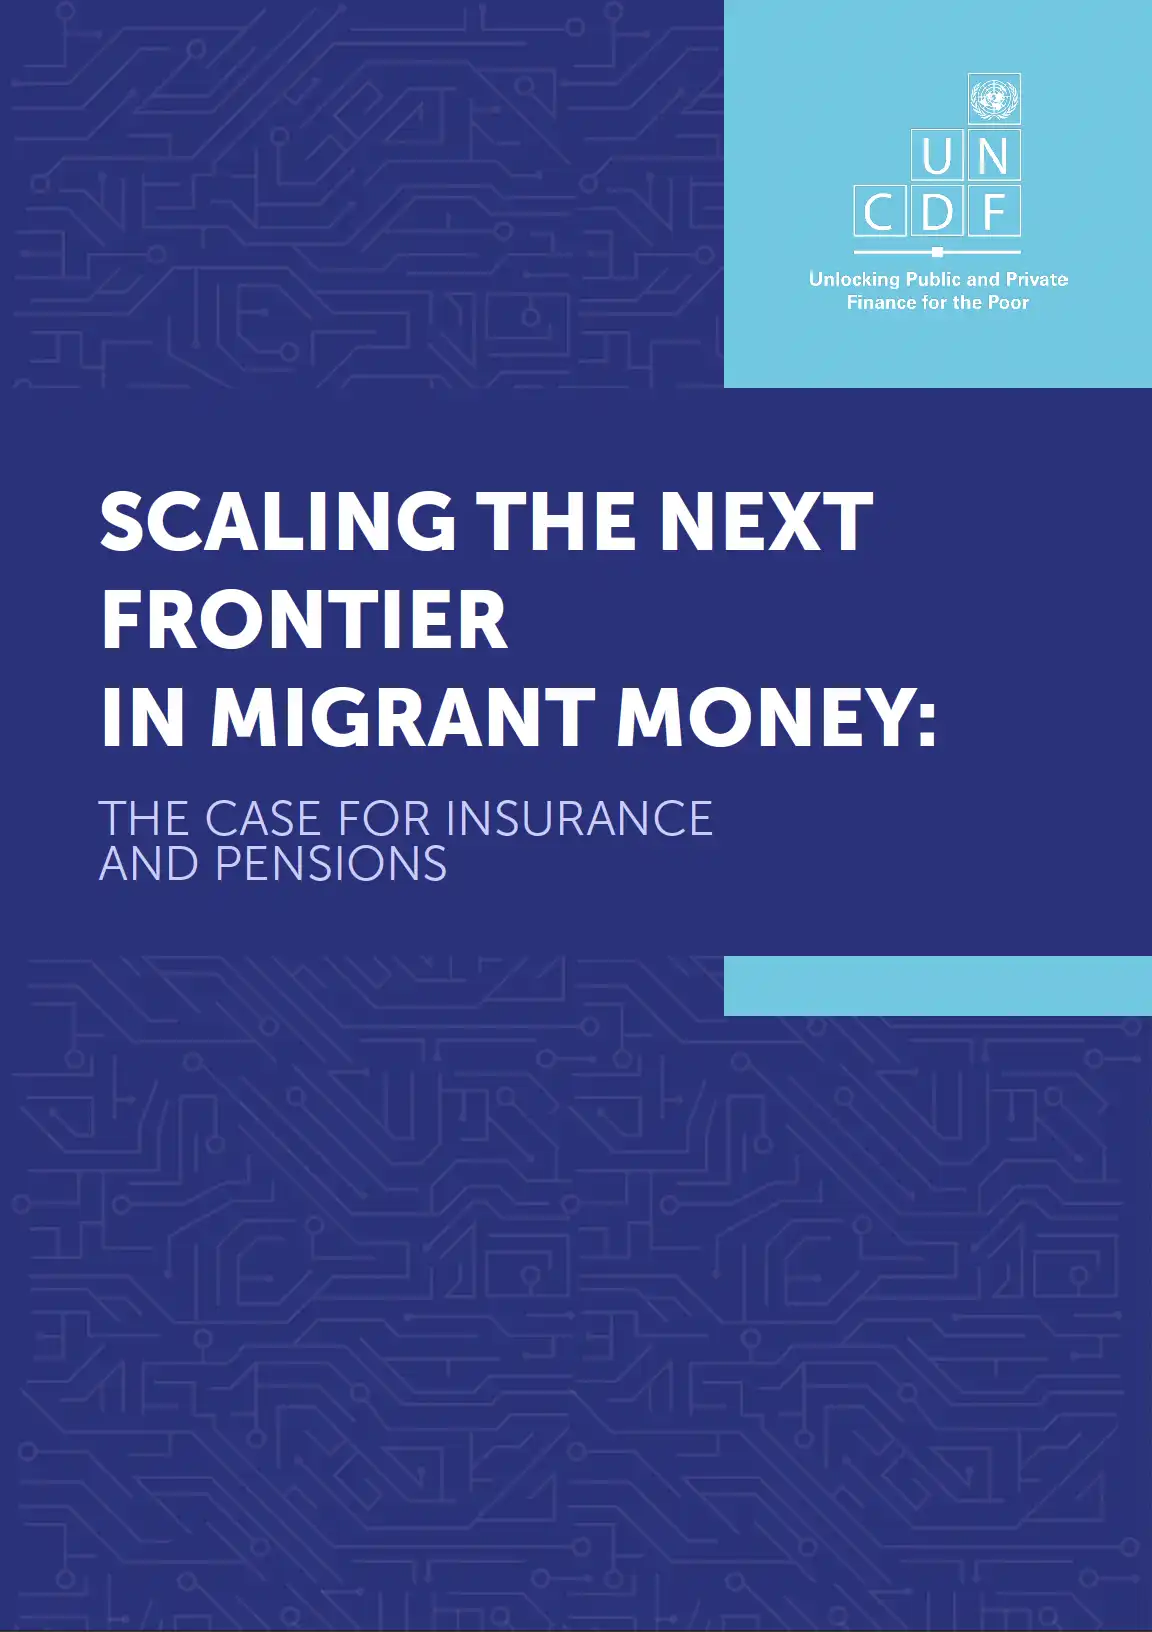 Scaling the Next Frontiers in Migrant Insurance and Pensions